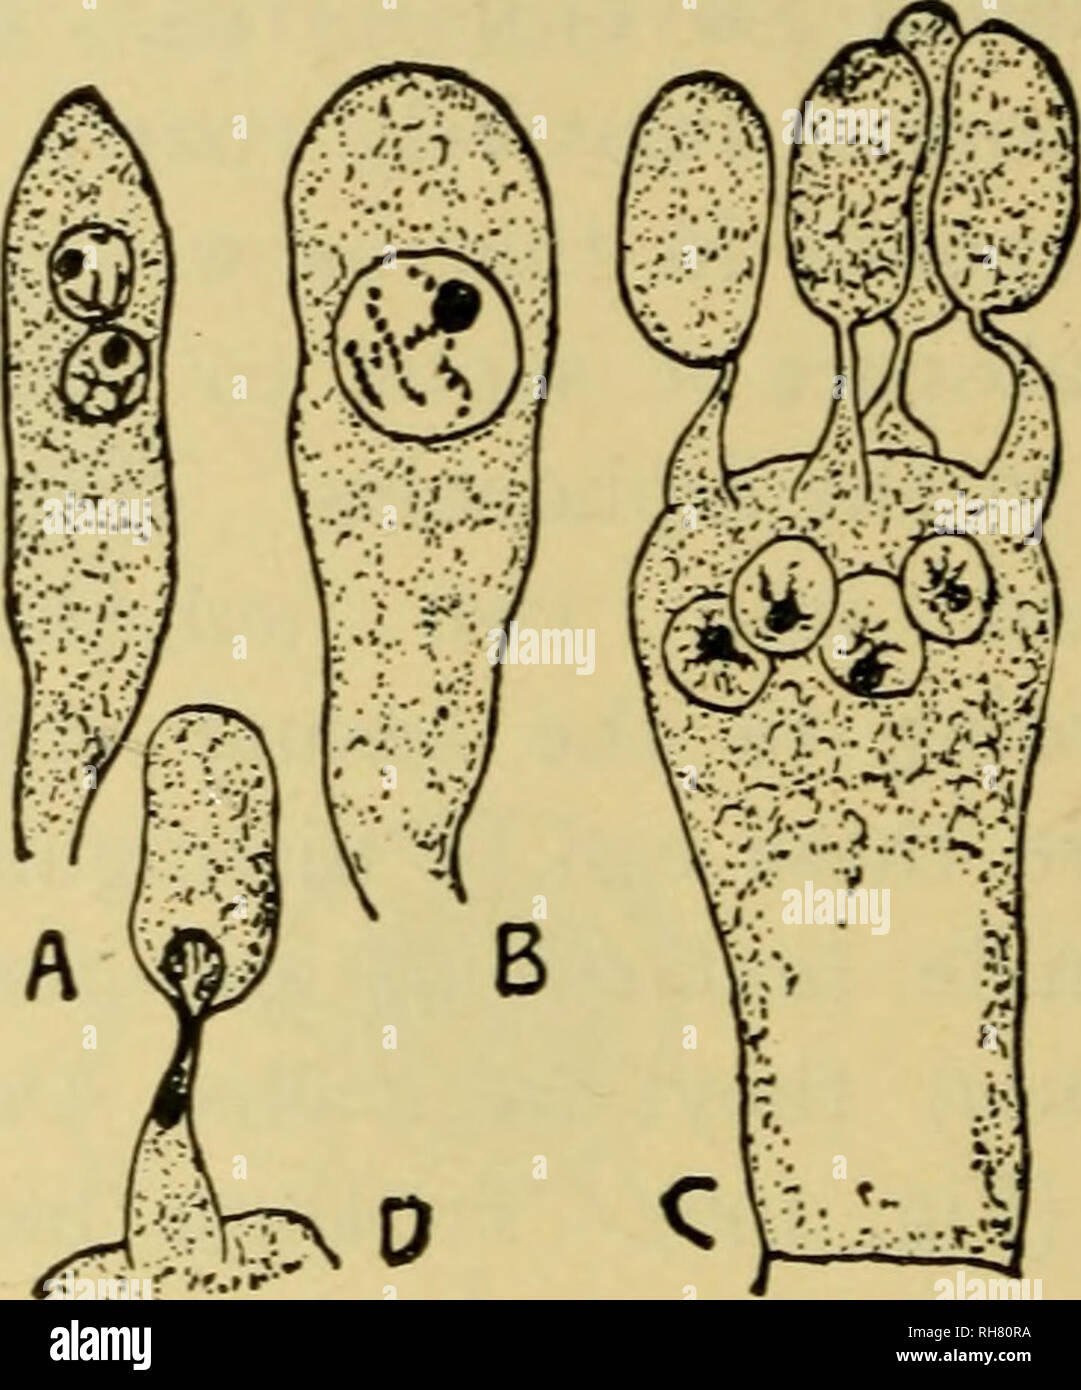 . Botany of the living plant. Botany; Plants. Fig. 298. Portion of the hymen ium of the Morel {Morchella esculenta). a =asci, each con- taining eight ascospores. p = paraphyses. sh = subhymenial tissue. ( x 240.) (After Strasburger.) Fig. 299. Honey Agaric (Armiliaria mellea). A, young basidium with two primary nuclei. P^ after fusion of the two nuclei. C =*a basidium of Hypholoma appendiculatum before the four nuclei derived from the secondary nucleus of the basidium have passed into the four basidiospores D = passage of a nucleus into the basidio- spore. (After Ruhland.) (From Stras- burger. Stock Photo